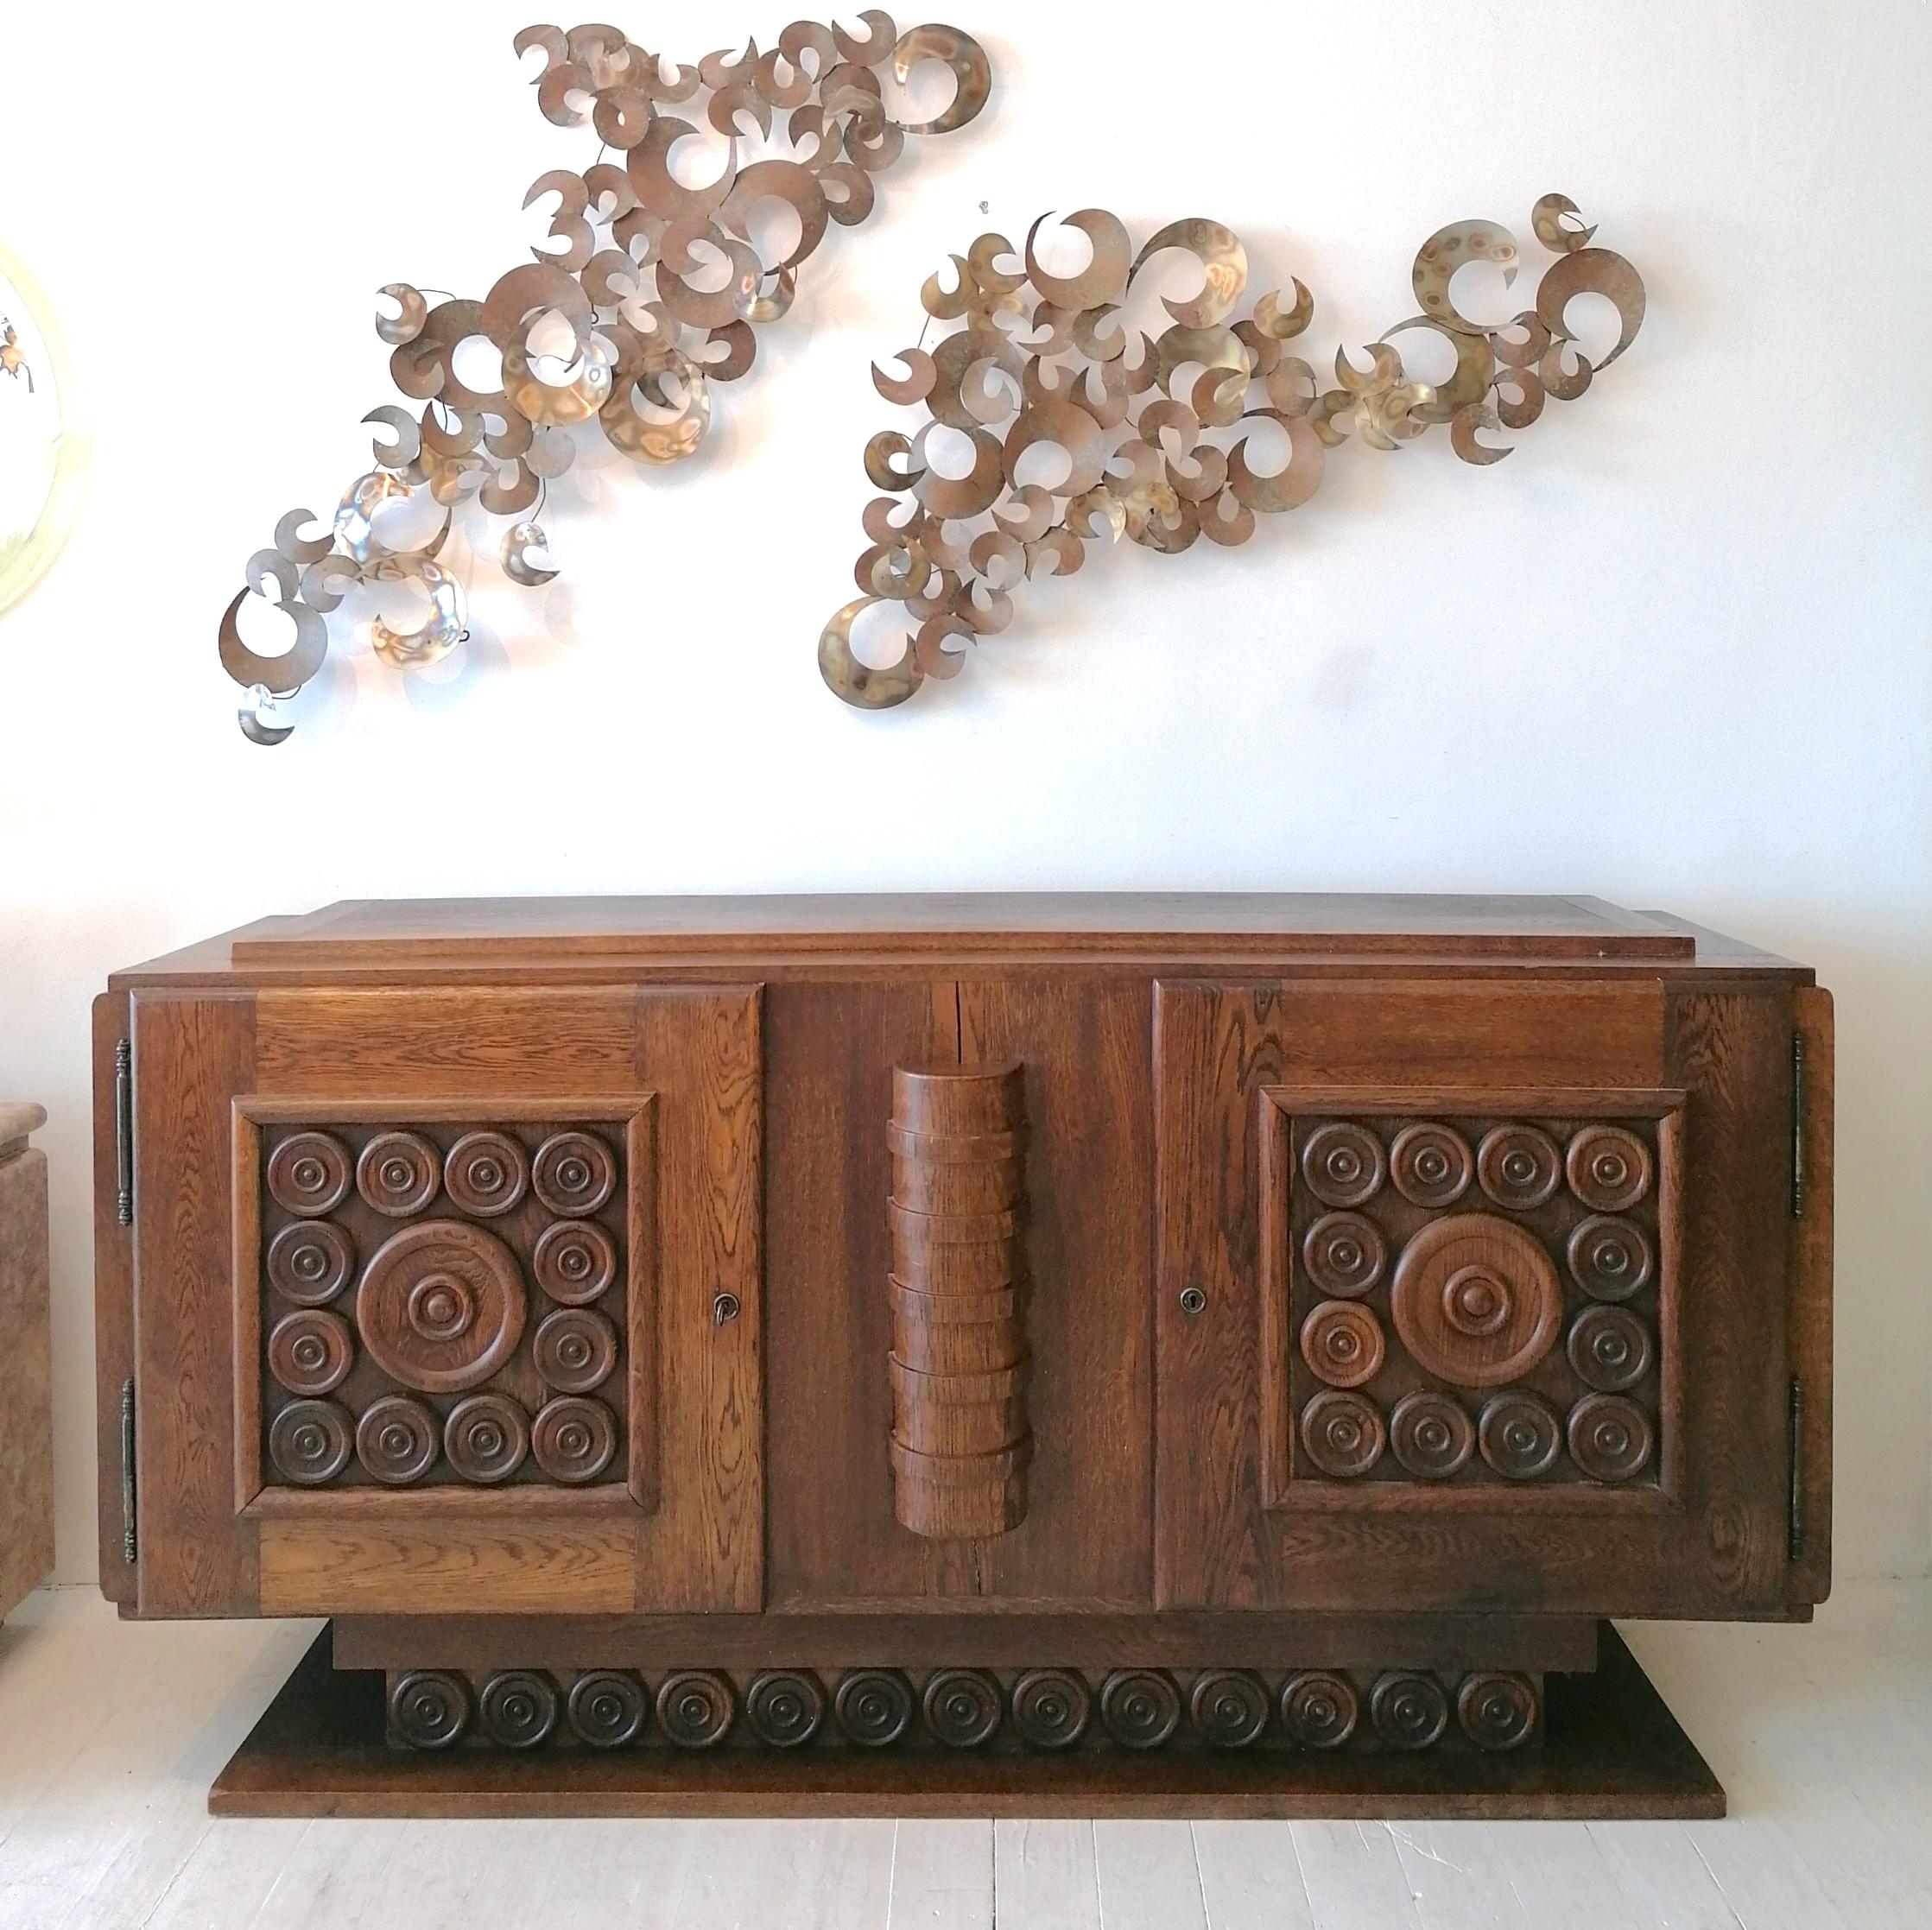 A rare & beautiful Art Deco oak sideboard by Charles Dudouyt, France, circa 1930s, with brutalist styling in the roundel relief design to the front and lower plinth section. Elegant bronzed metal outer hinge details.
It has two locking cabinet